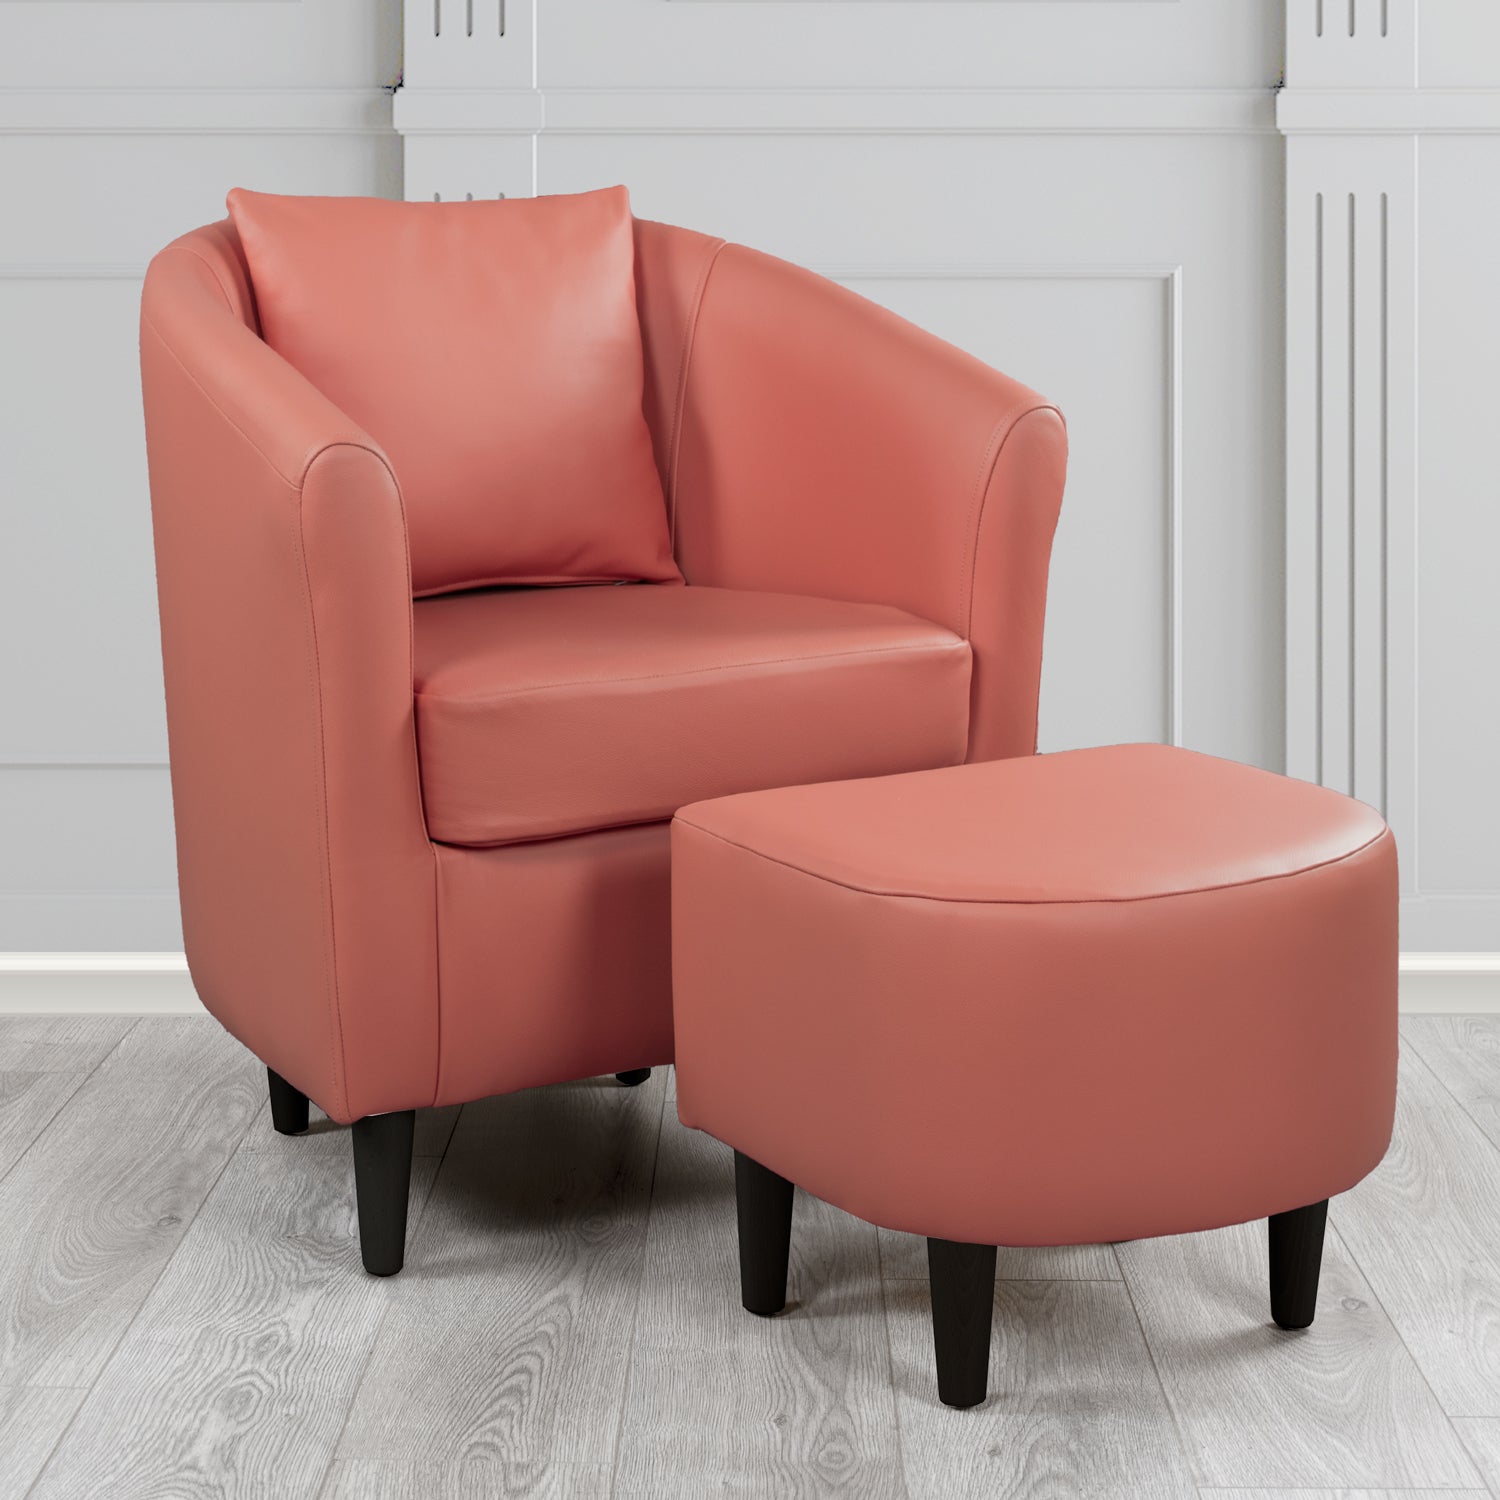 St Tropez Shelly Wood Burner Crib 5 Genuine Leather Tub Chair & Footstool Set With Scatter Cushion (6619546976298)